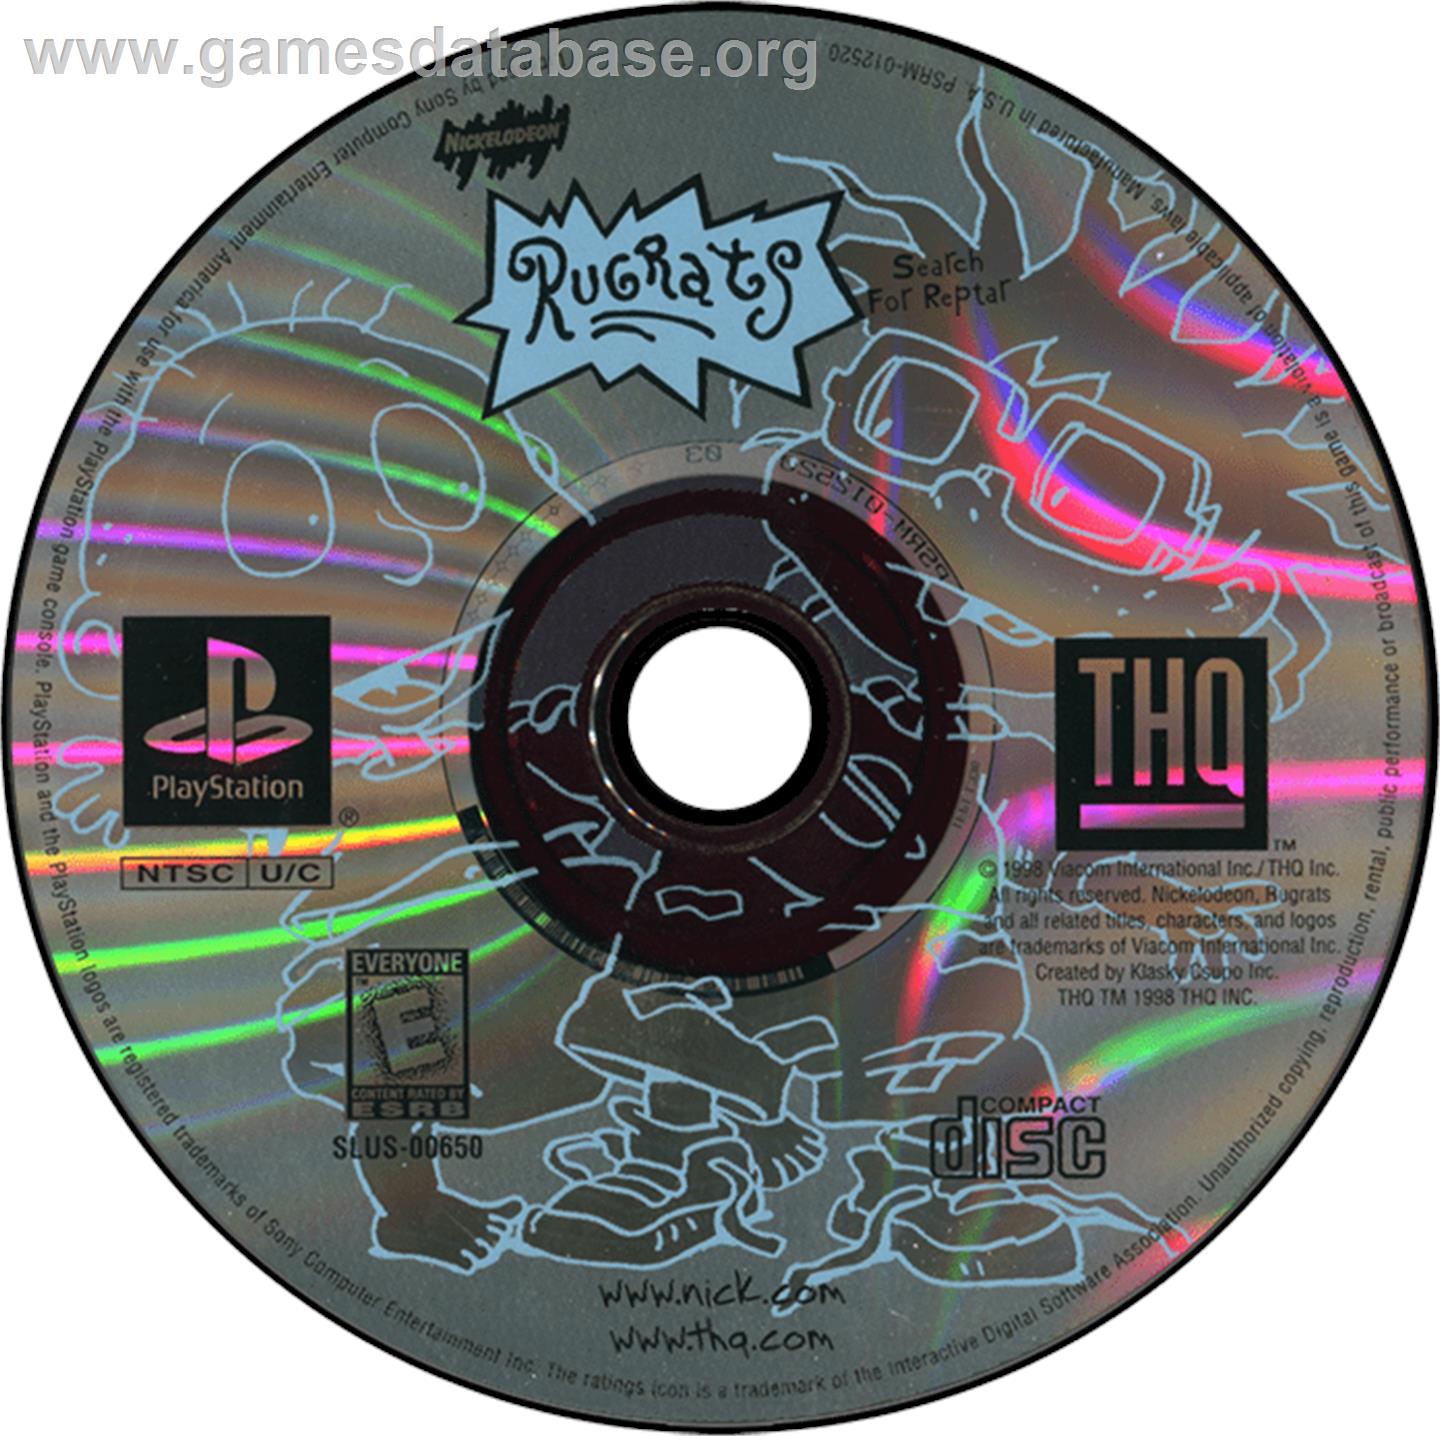 Rugrats: Search for Reptar - Sony Playstation - Artwork - Disc